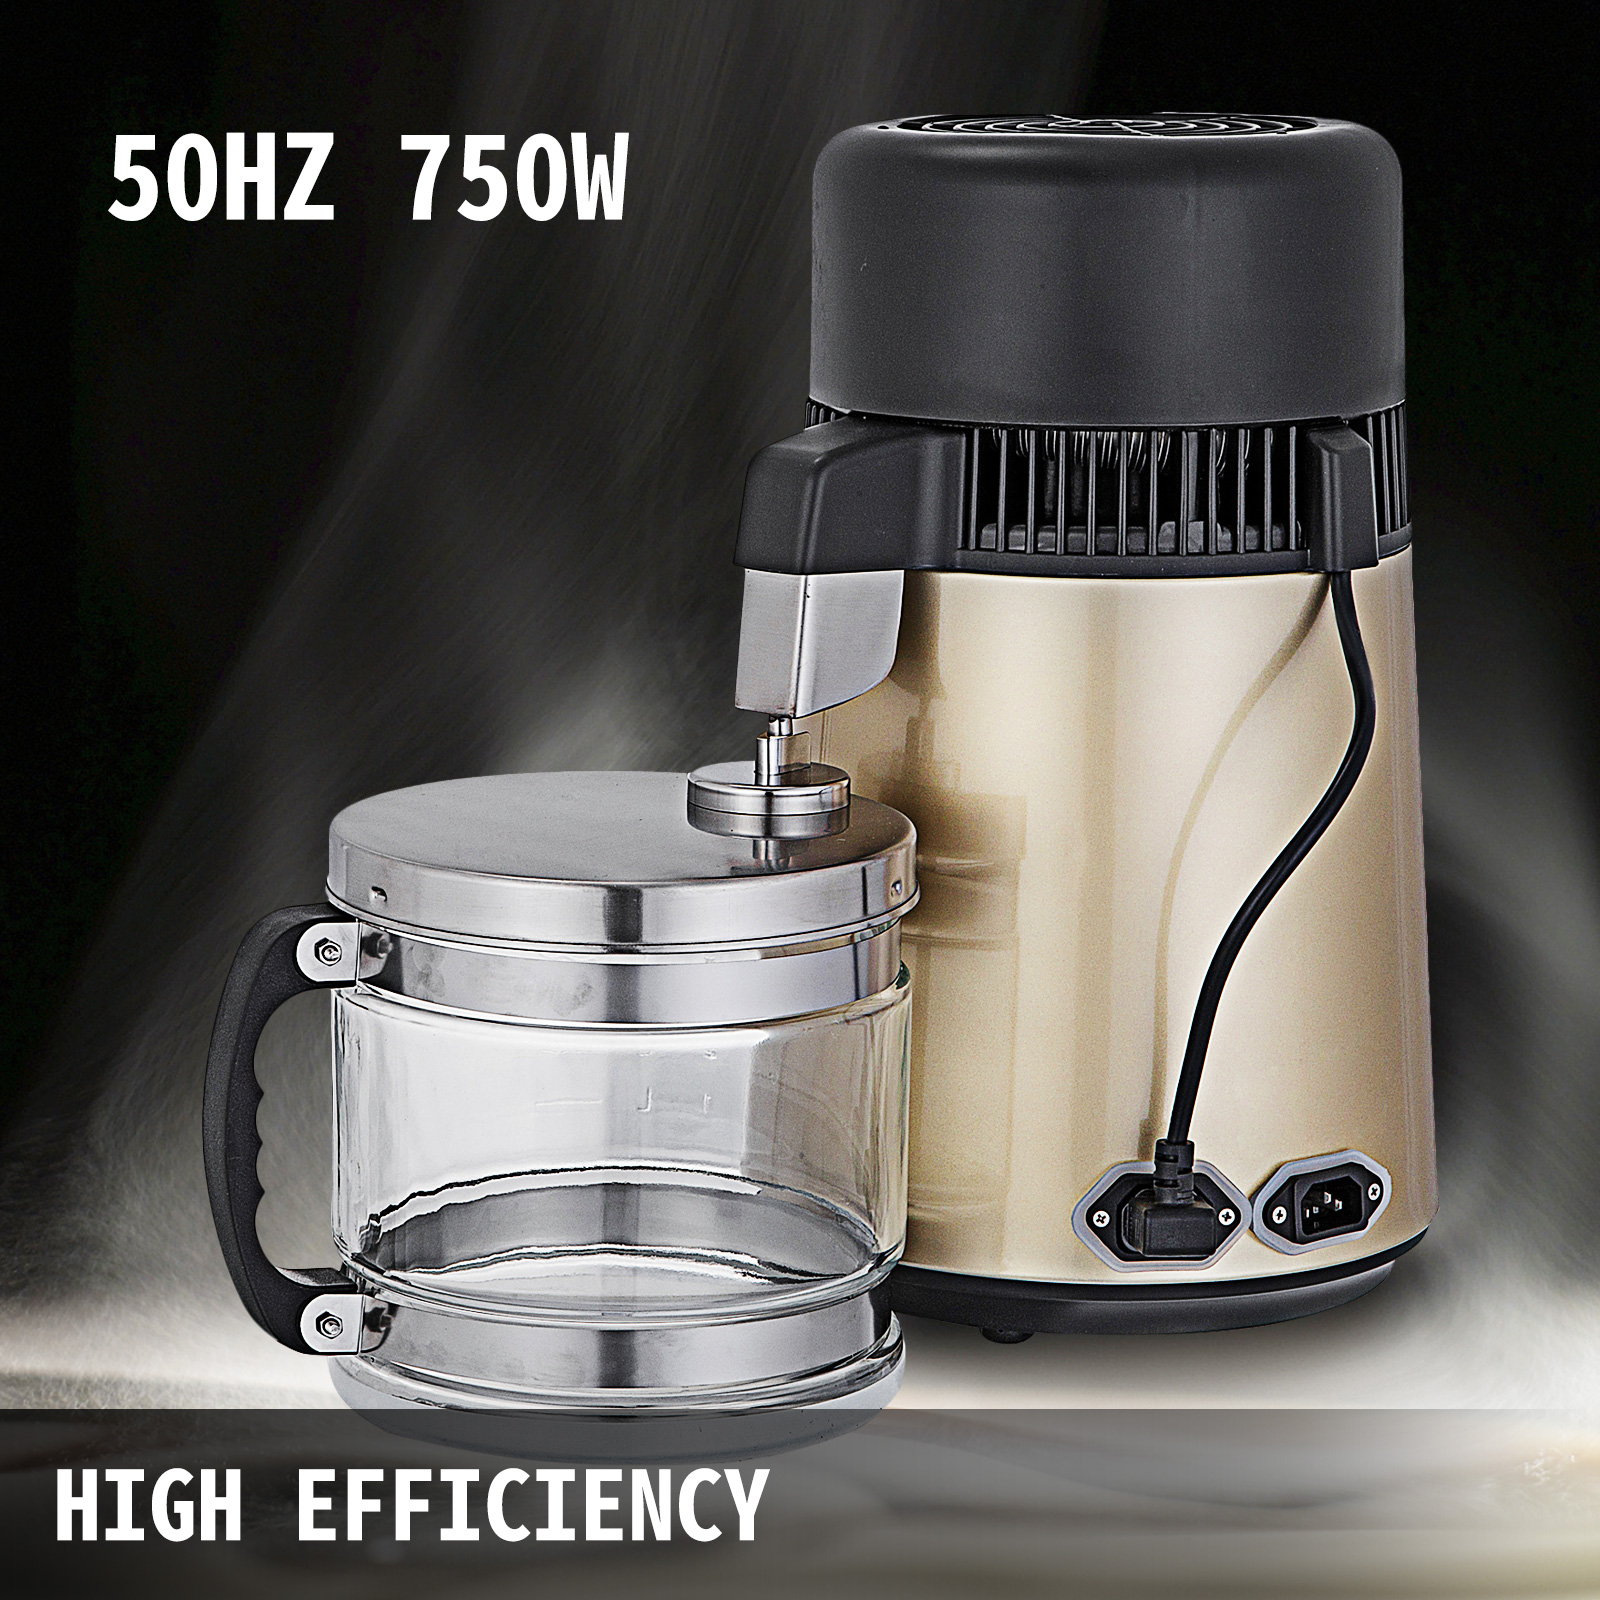 VEVOR 50 Cups Commercial Coffee Urn Stainless Steel Large Coffee Dispenser  1000W Electric Coffee Maker Urn For Quick Brewing - AliExpress